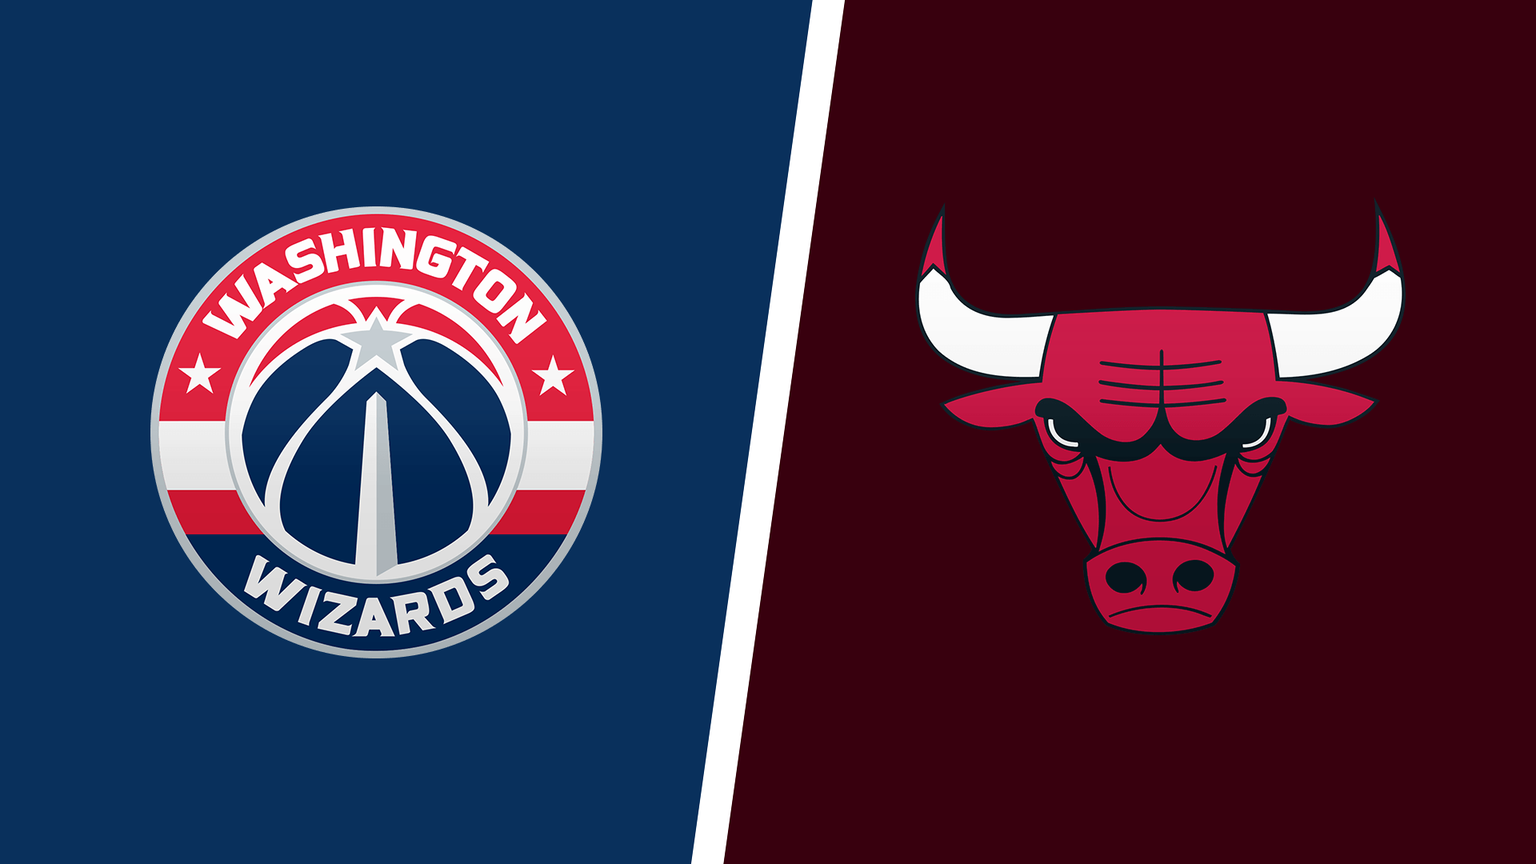 How to Watch Chicago Bulls vs. Washington Wizards Game Live Online on